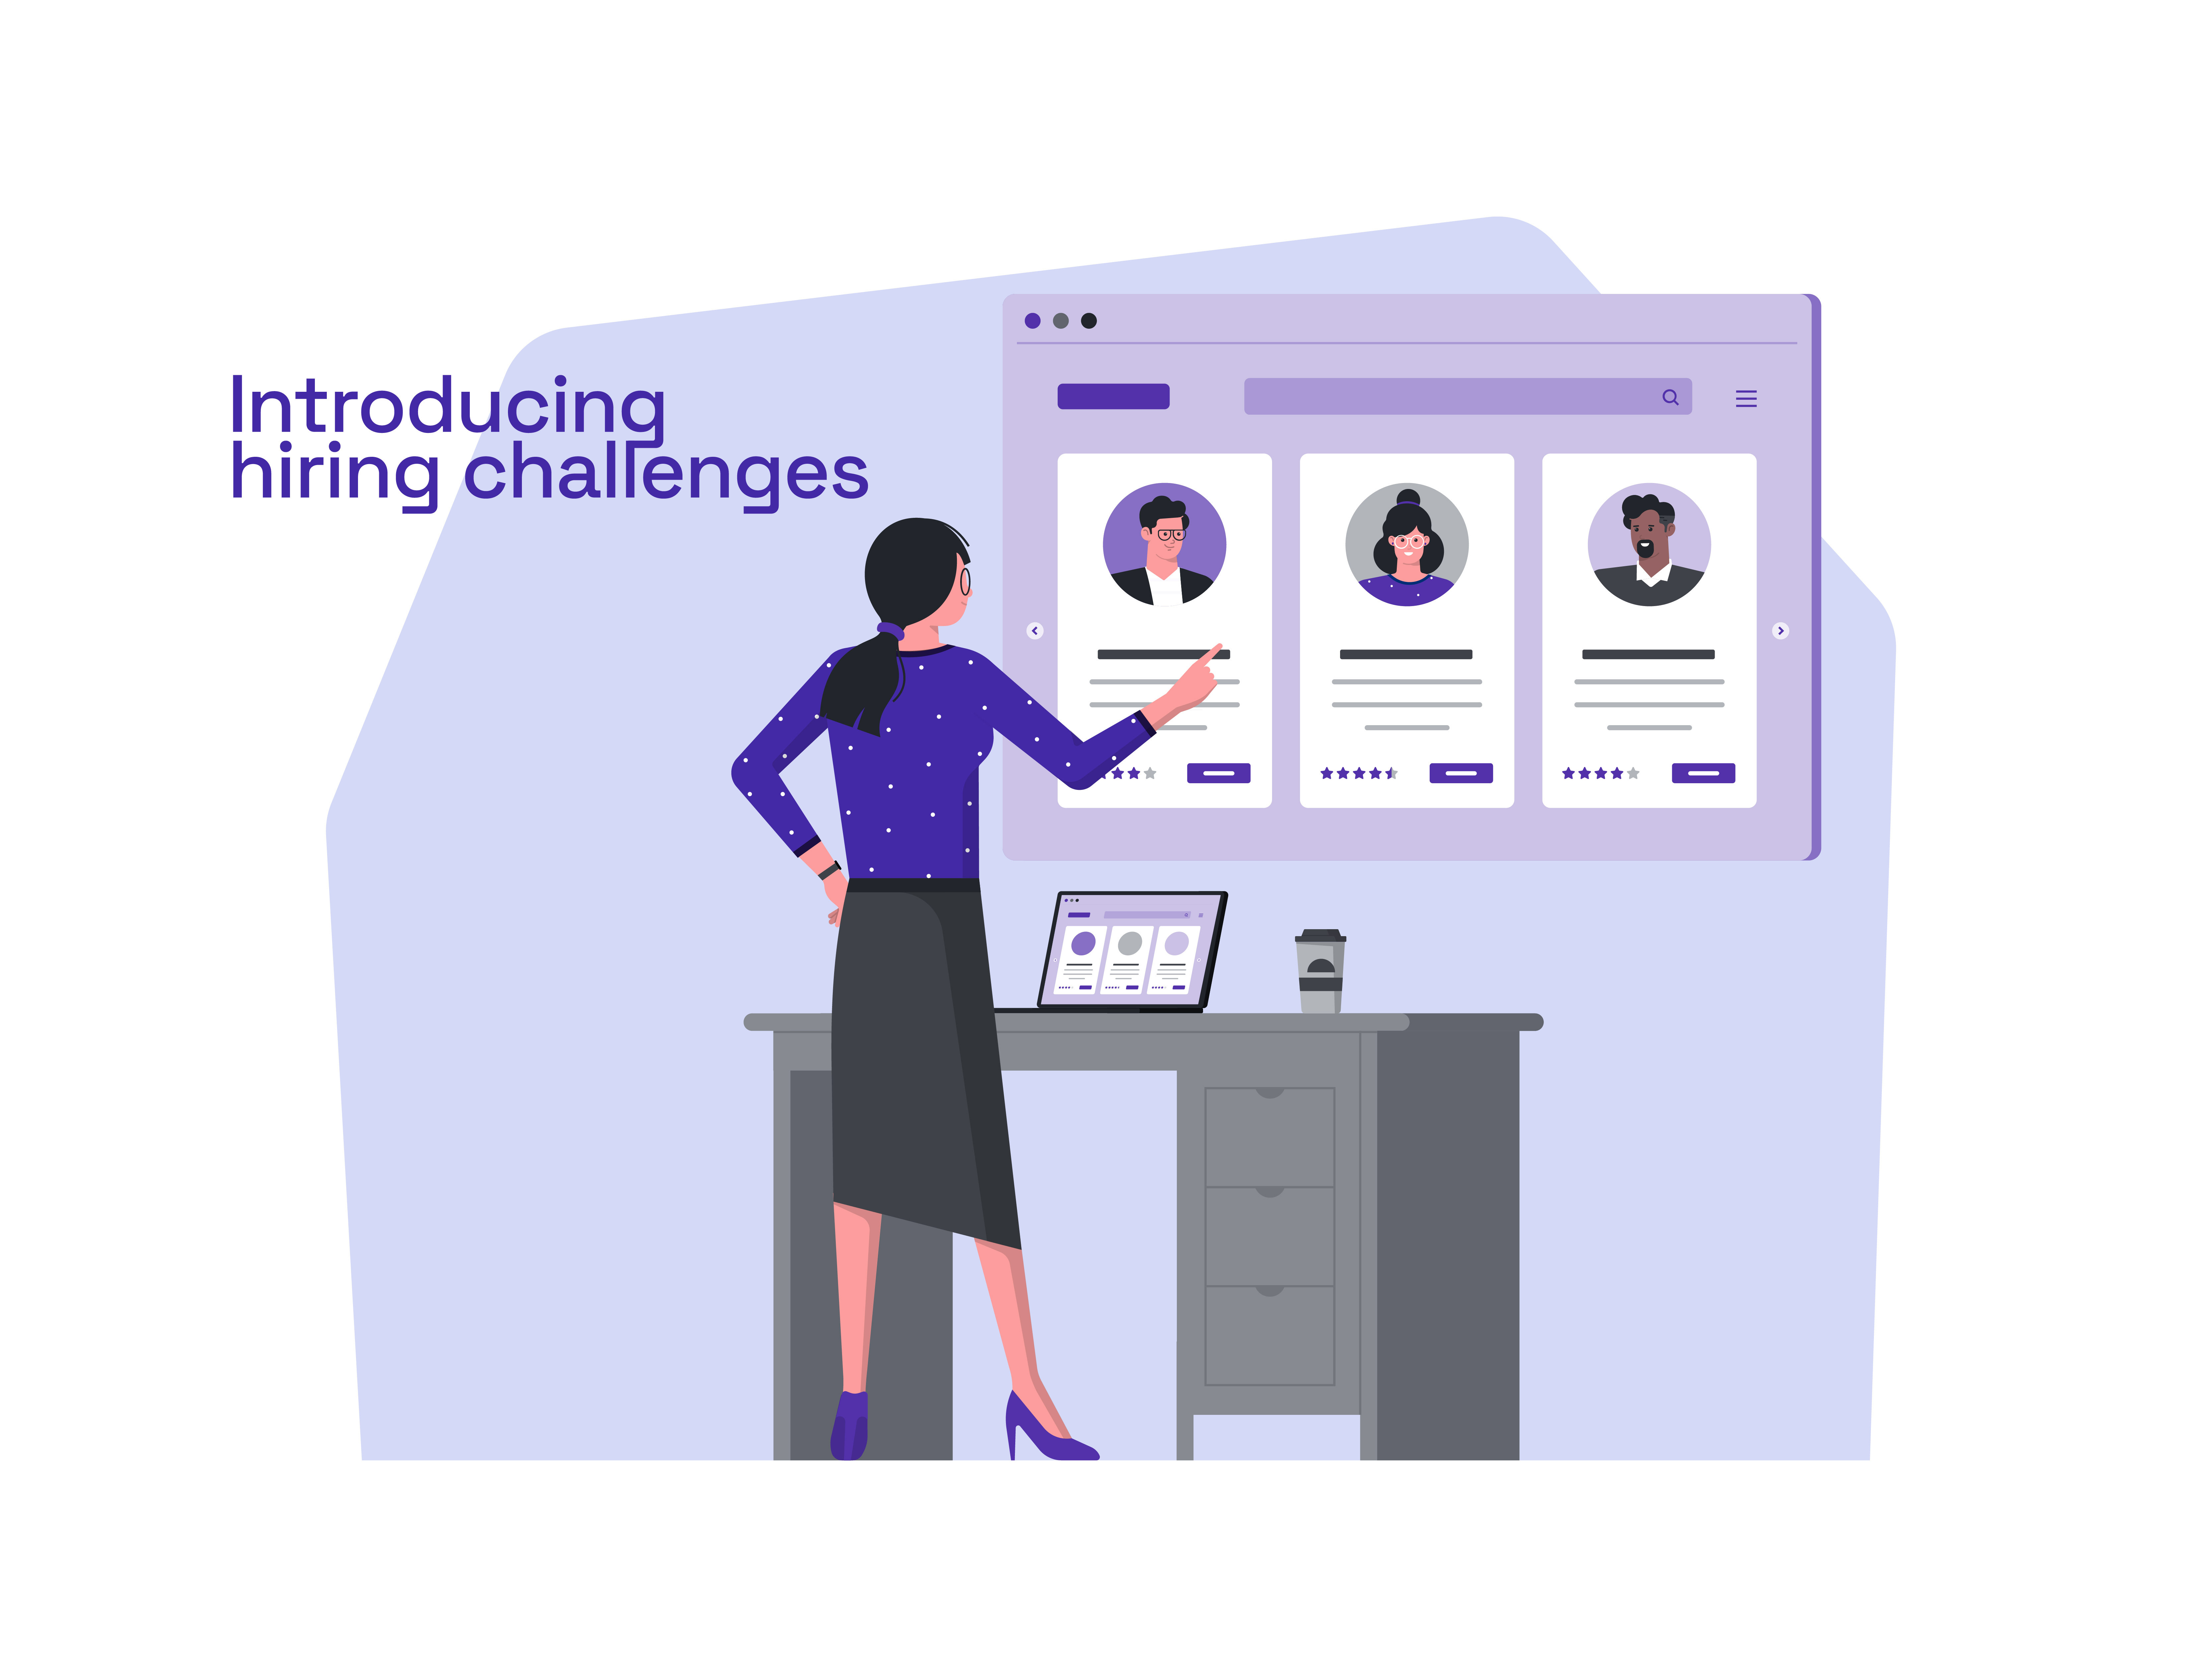 Introducing hiring challenges: A reliable and fast way to hire talent